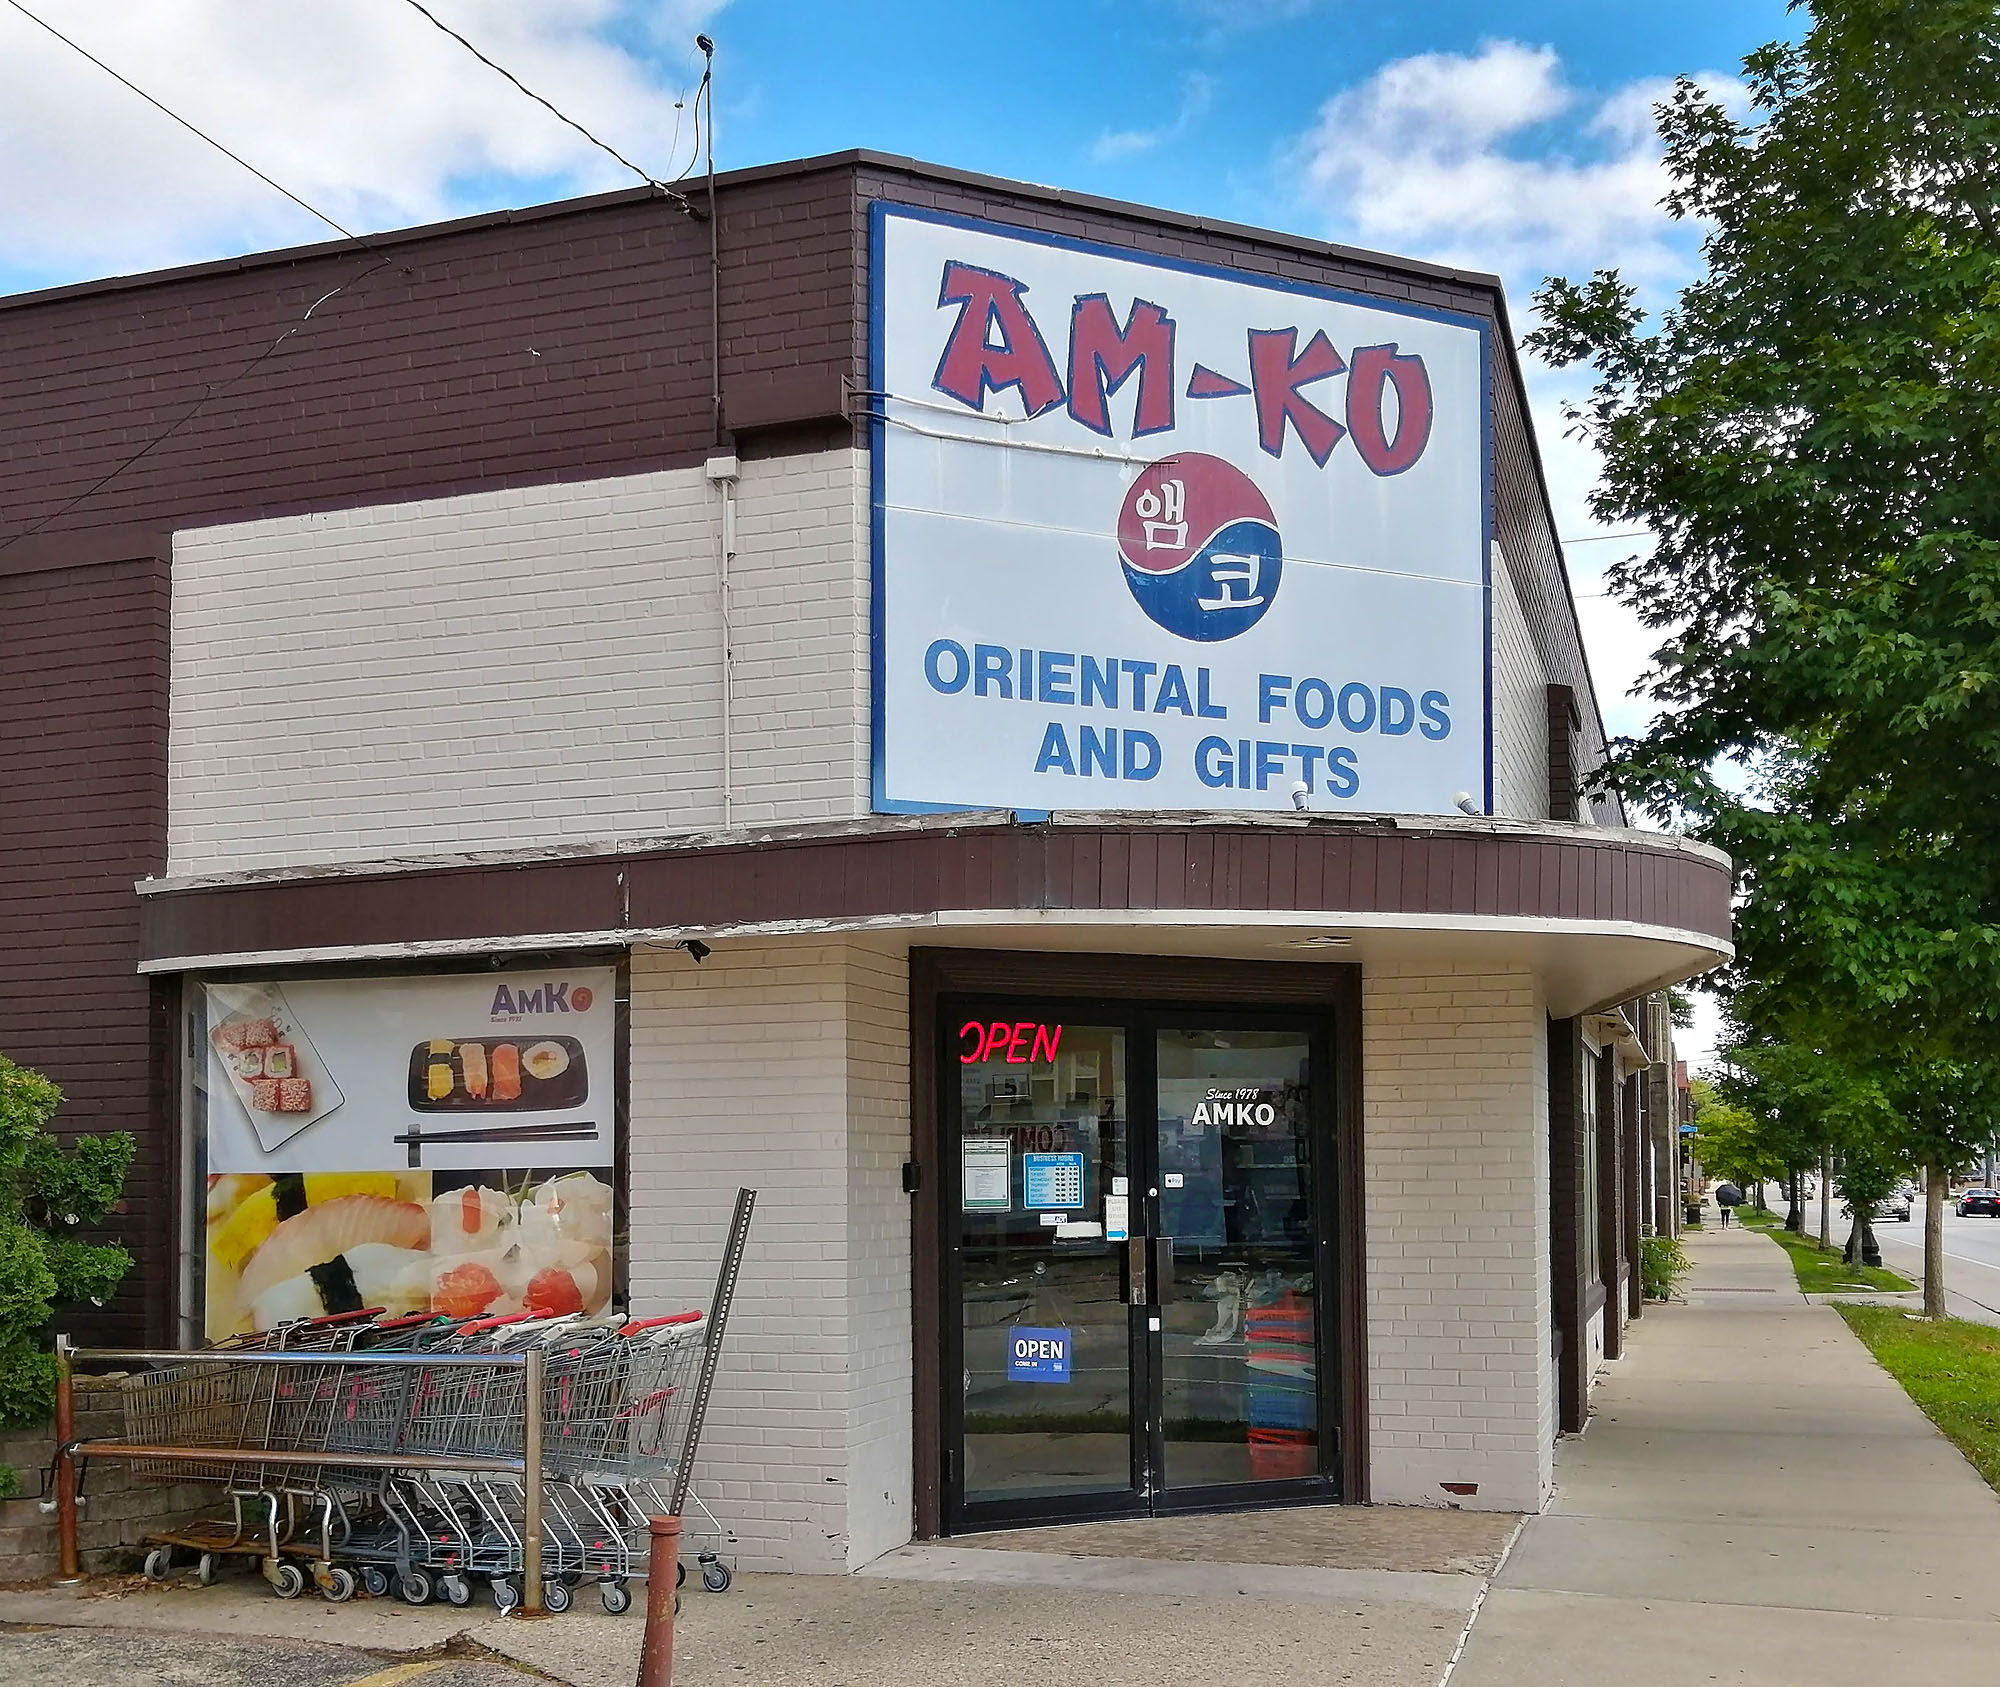 A corner grocer storefront with a large sign depicting â€œAM-KO ORIENTAL FOODS AND GIFTSâ€; a red neon sign spelling out â€œOPENâ€ is also prominently visible. Photo by Paul Young.